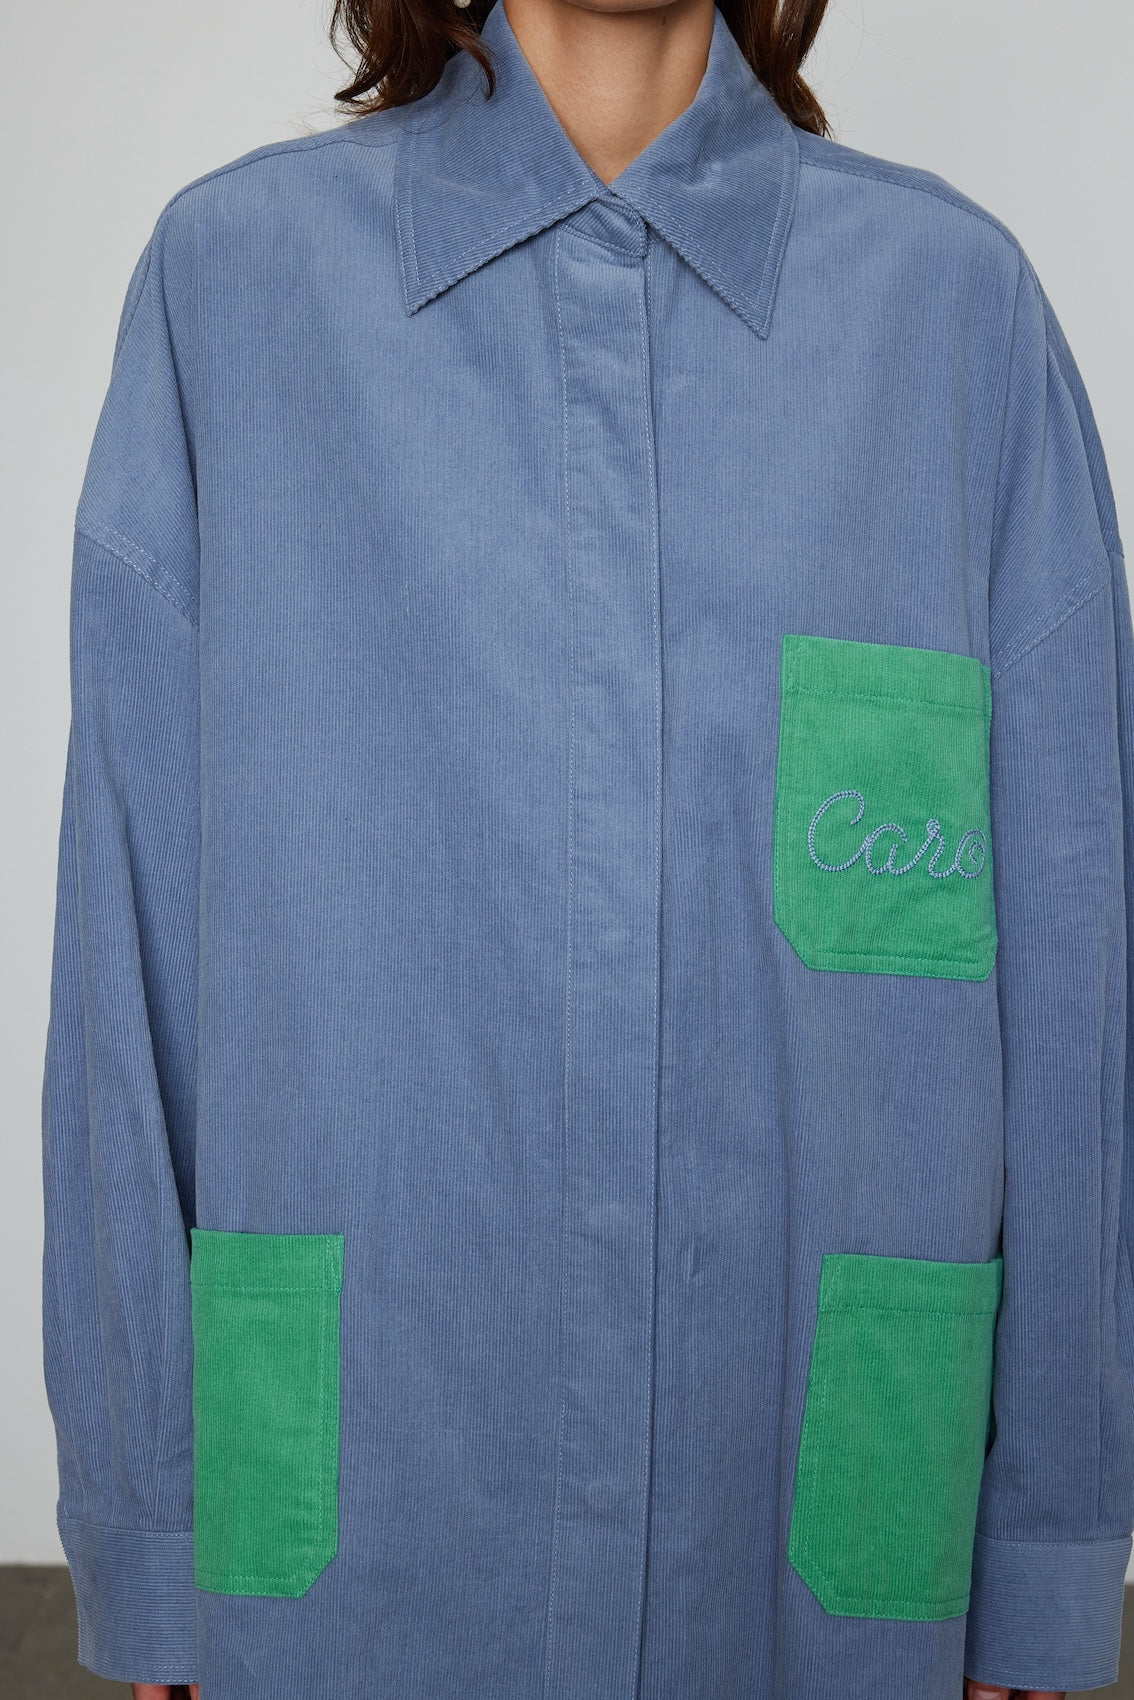 Caro Editions Frederik Shirt is an oversized cotton corduroy style with big sleeves, green pockets, and an embroidered Caro logo. Style it open over a dress, tank top, or t-shirt, or wear it buttoned-up.